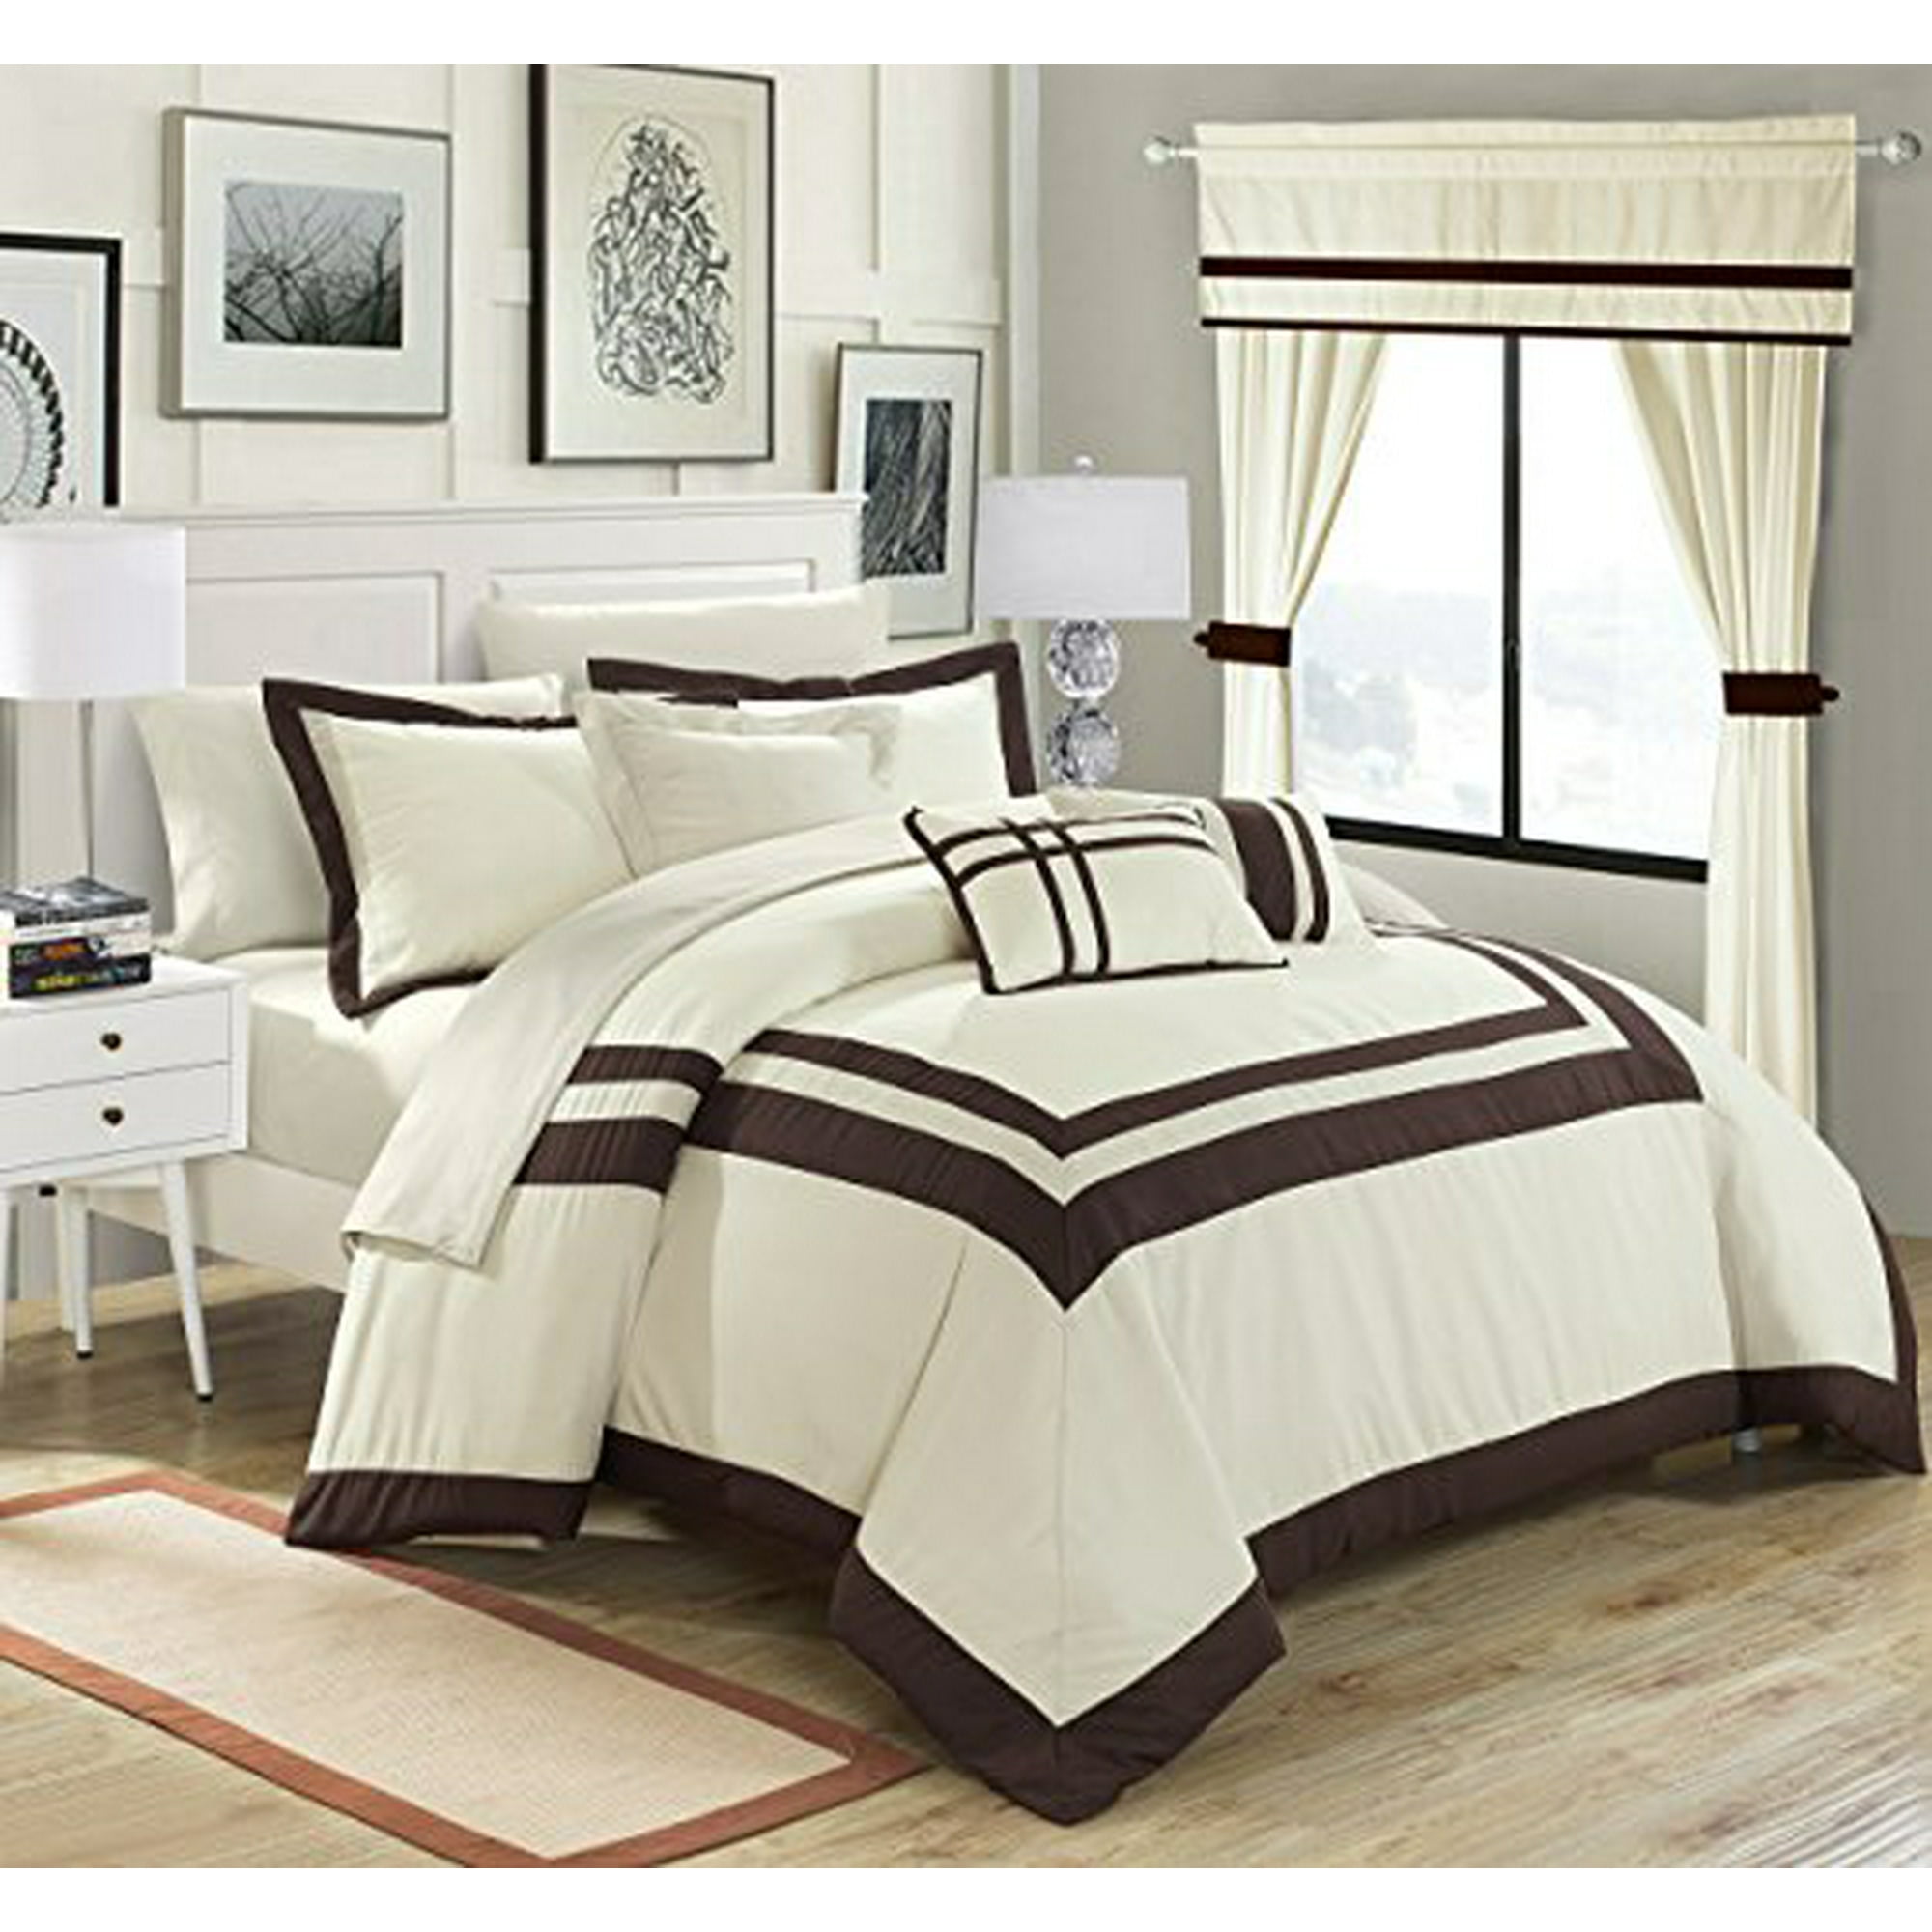 Piece Comforter Set Color Block Bed, Bed In A Bag With Curtains King